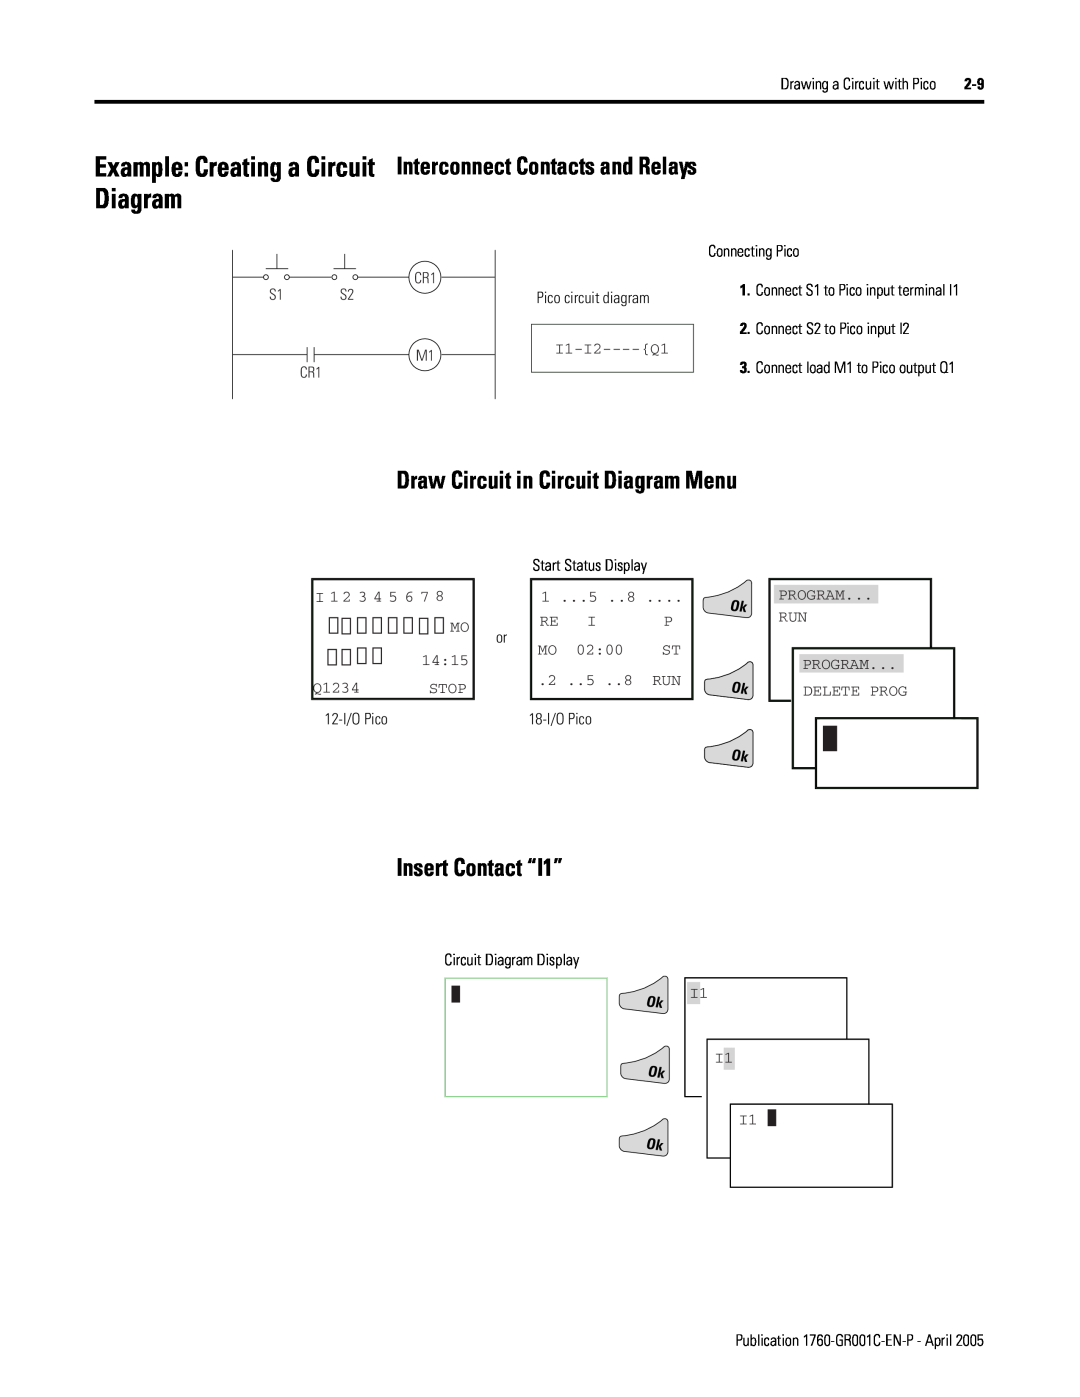 AB Soft 1760 manual Example Creating a Circuit Interconnect Contacts and Relays, Draw Circuit in Circuit Diagram Menu 